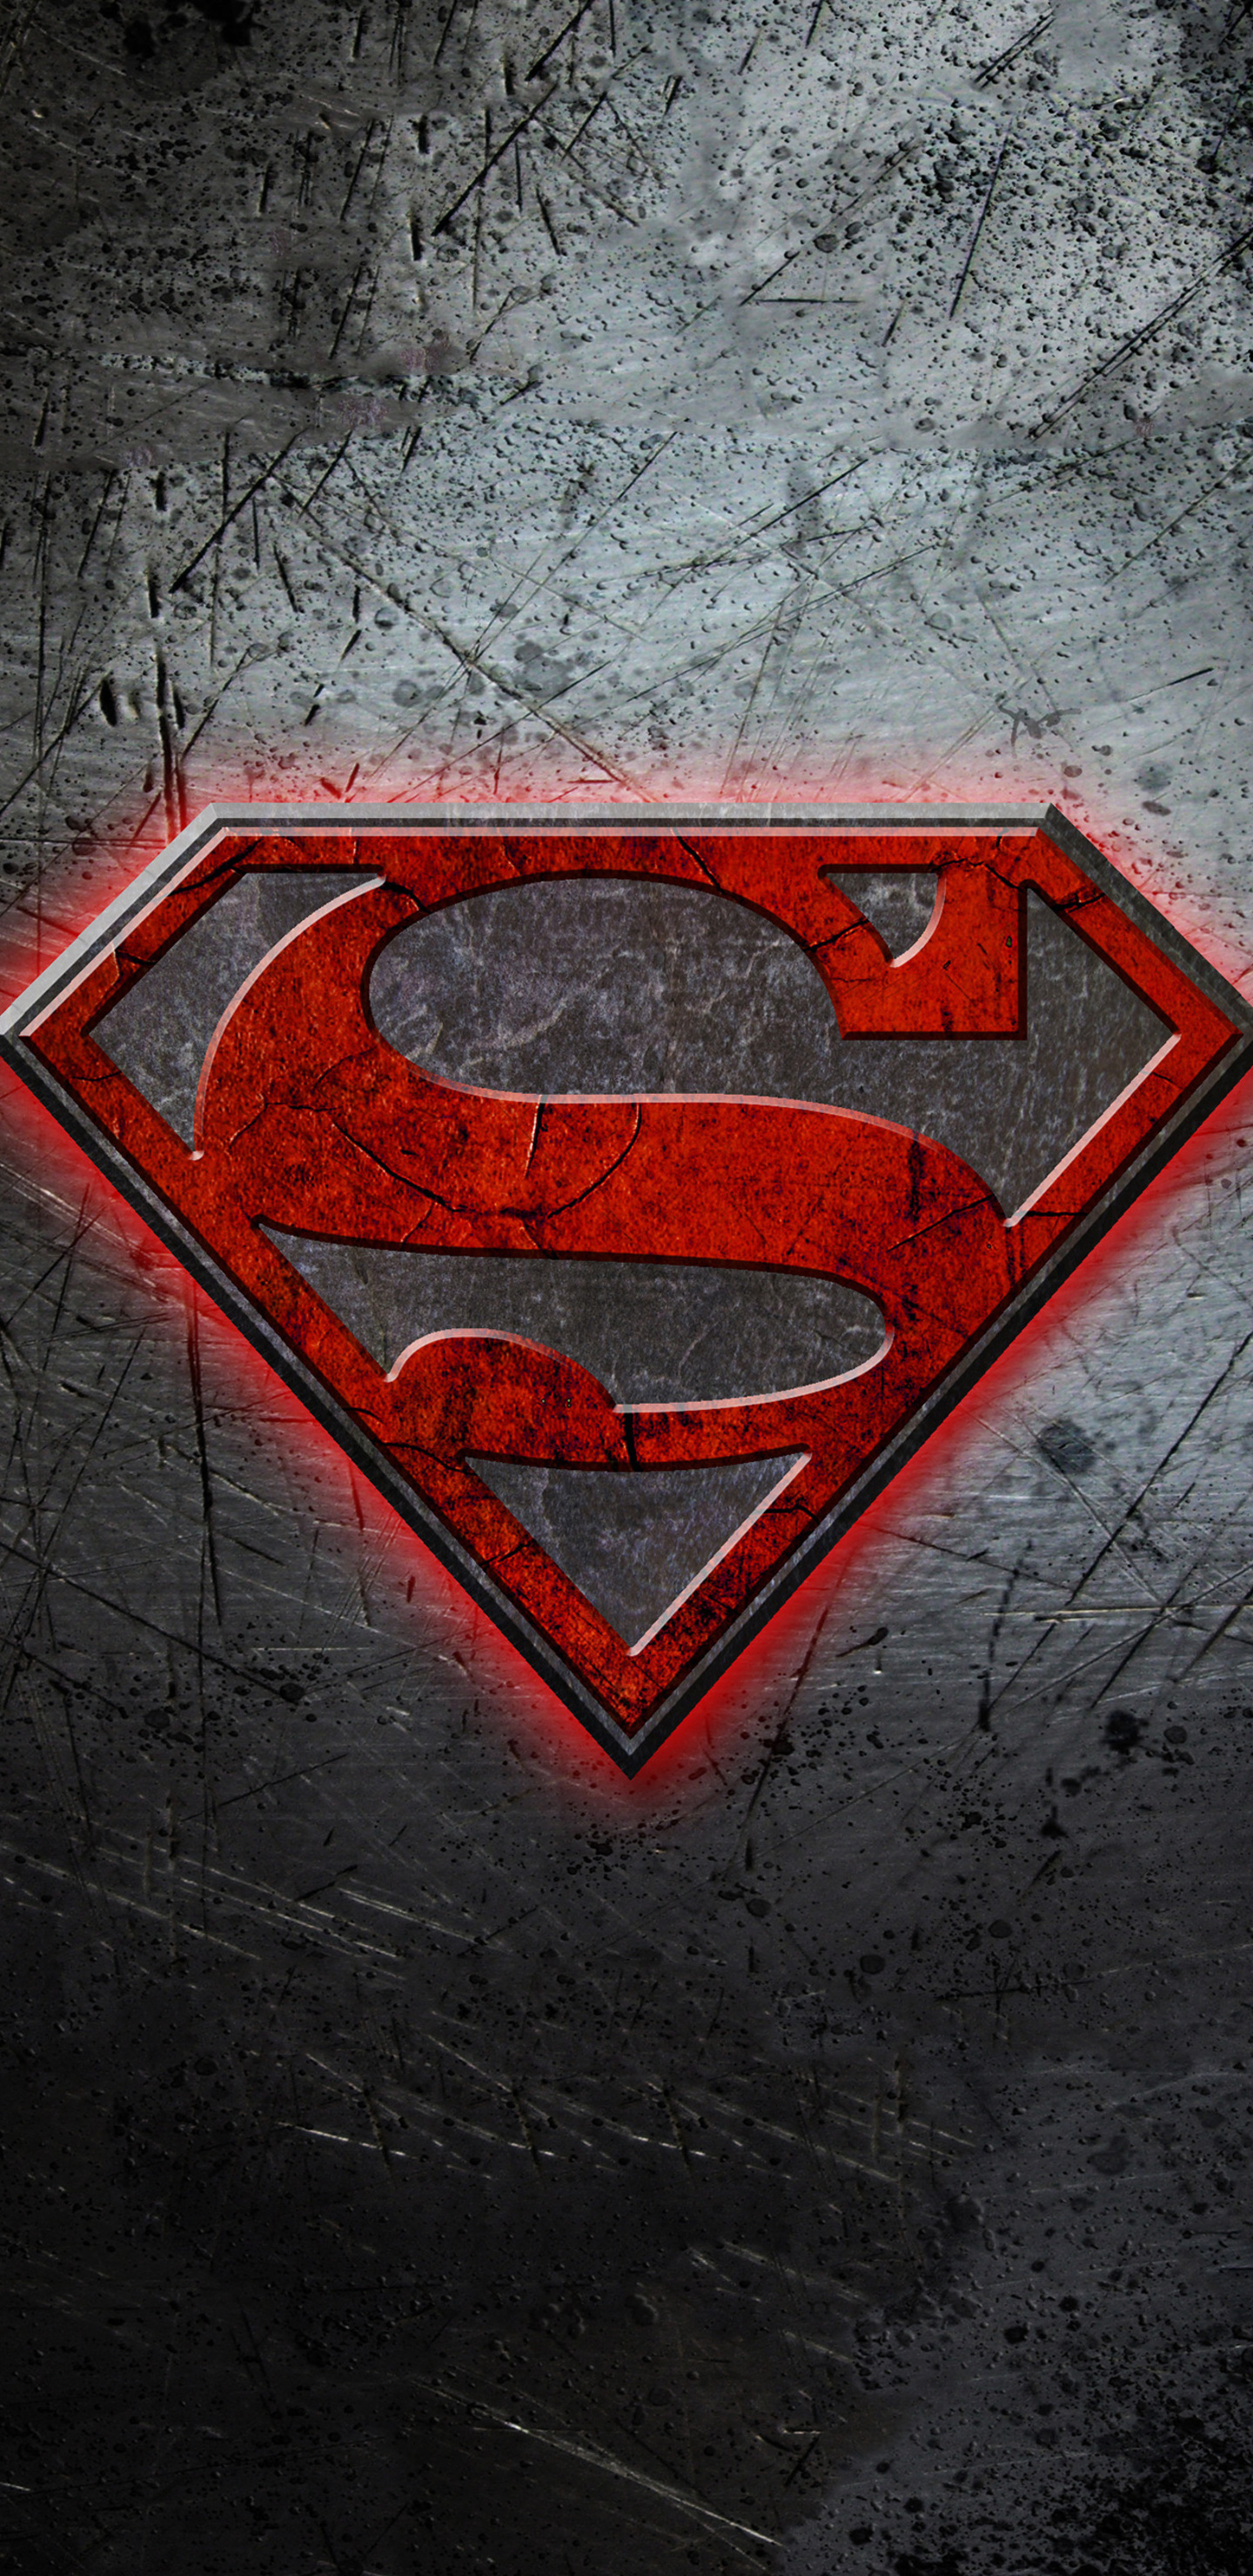 1440x2960 Superman Logo 4k Samsung Galaxy Note 9 8 S9 S8 S8 Qhd Hd 4k Wallpapers Images Backgrounds Photos And Pictures